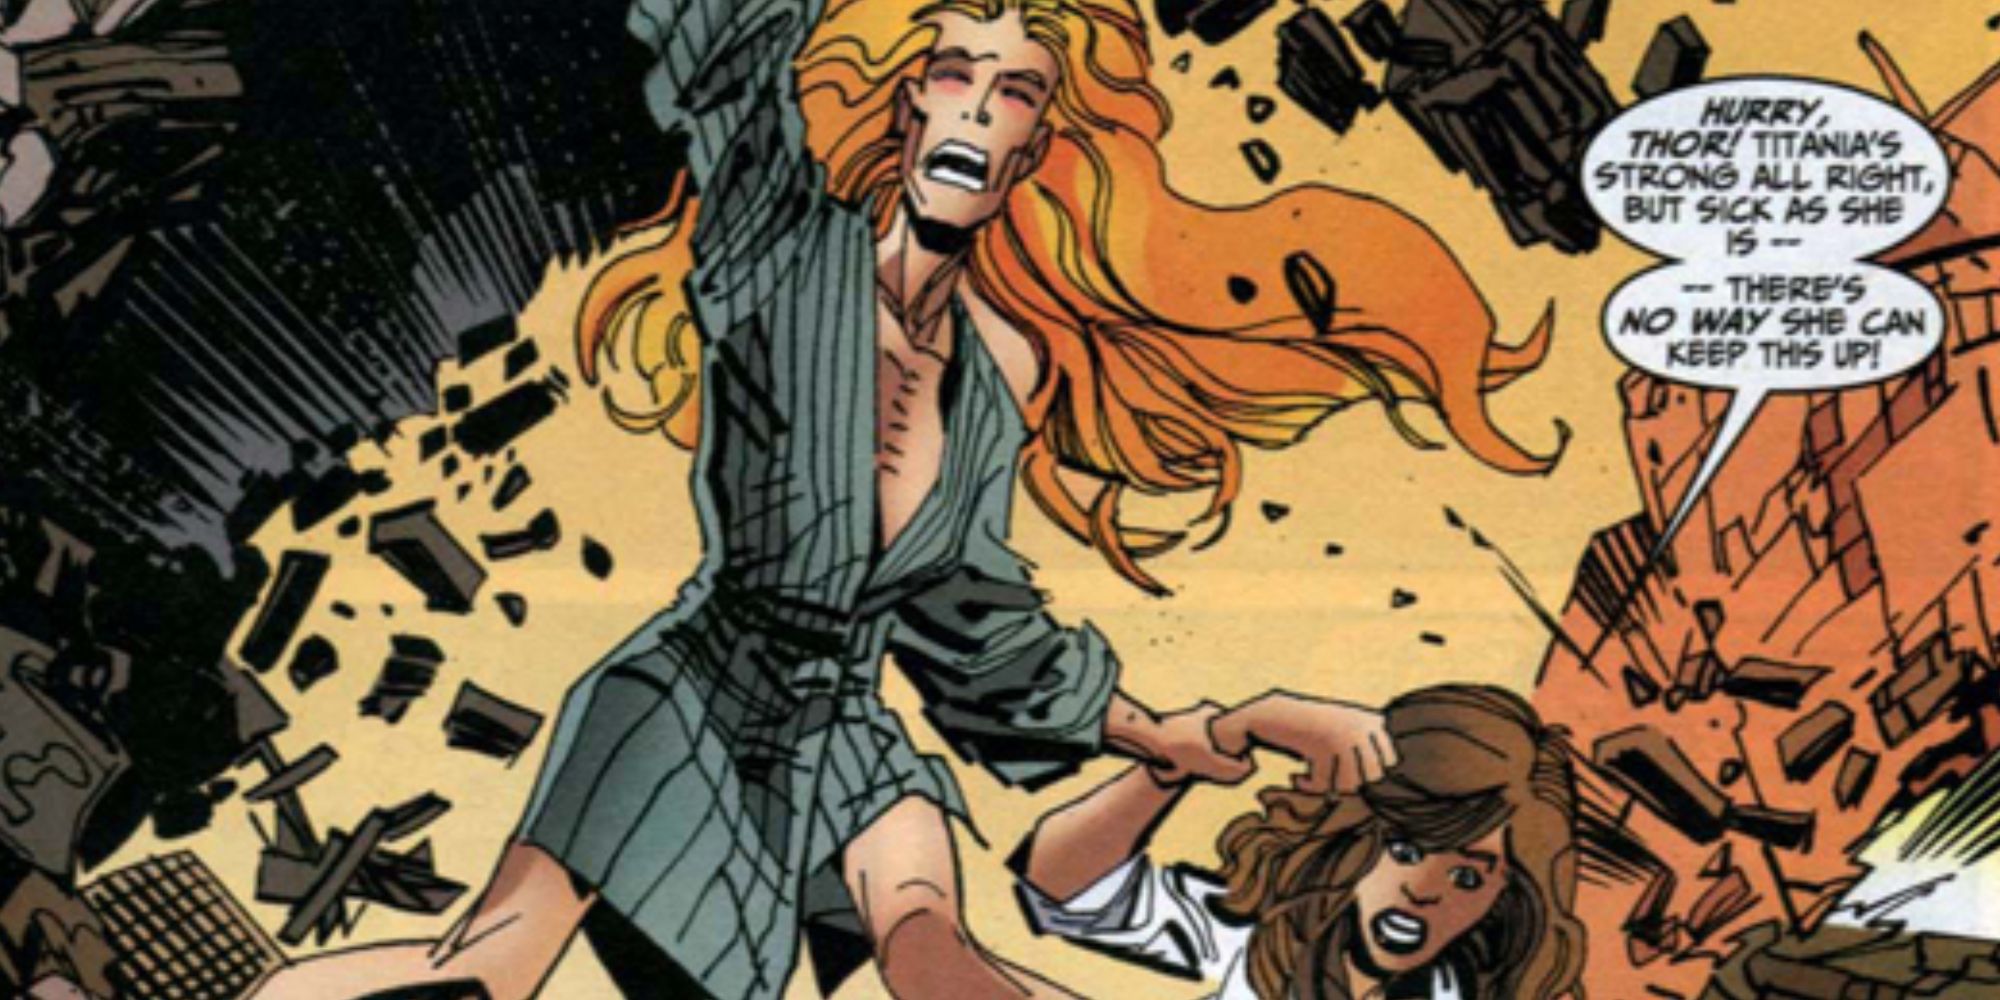 Titania saves Jane Foster while battling cancer